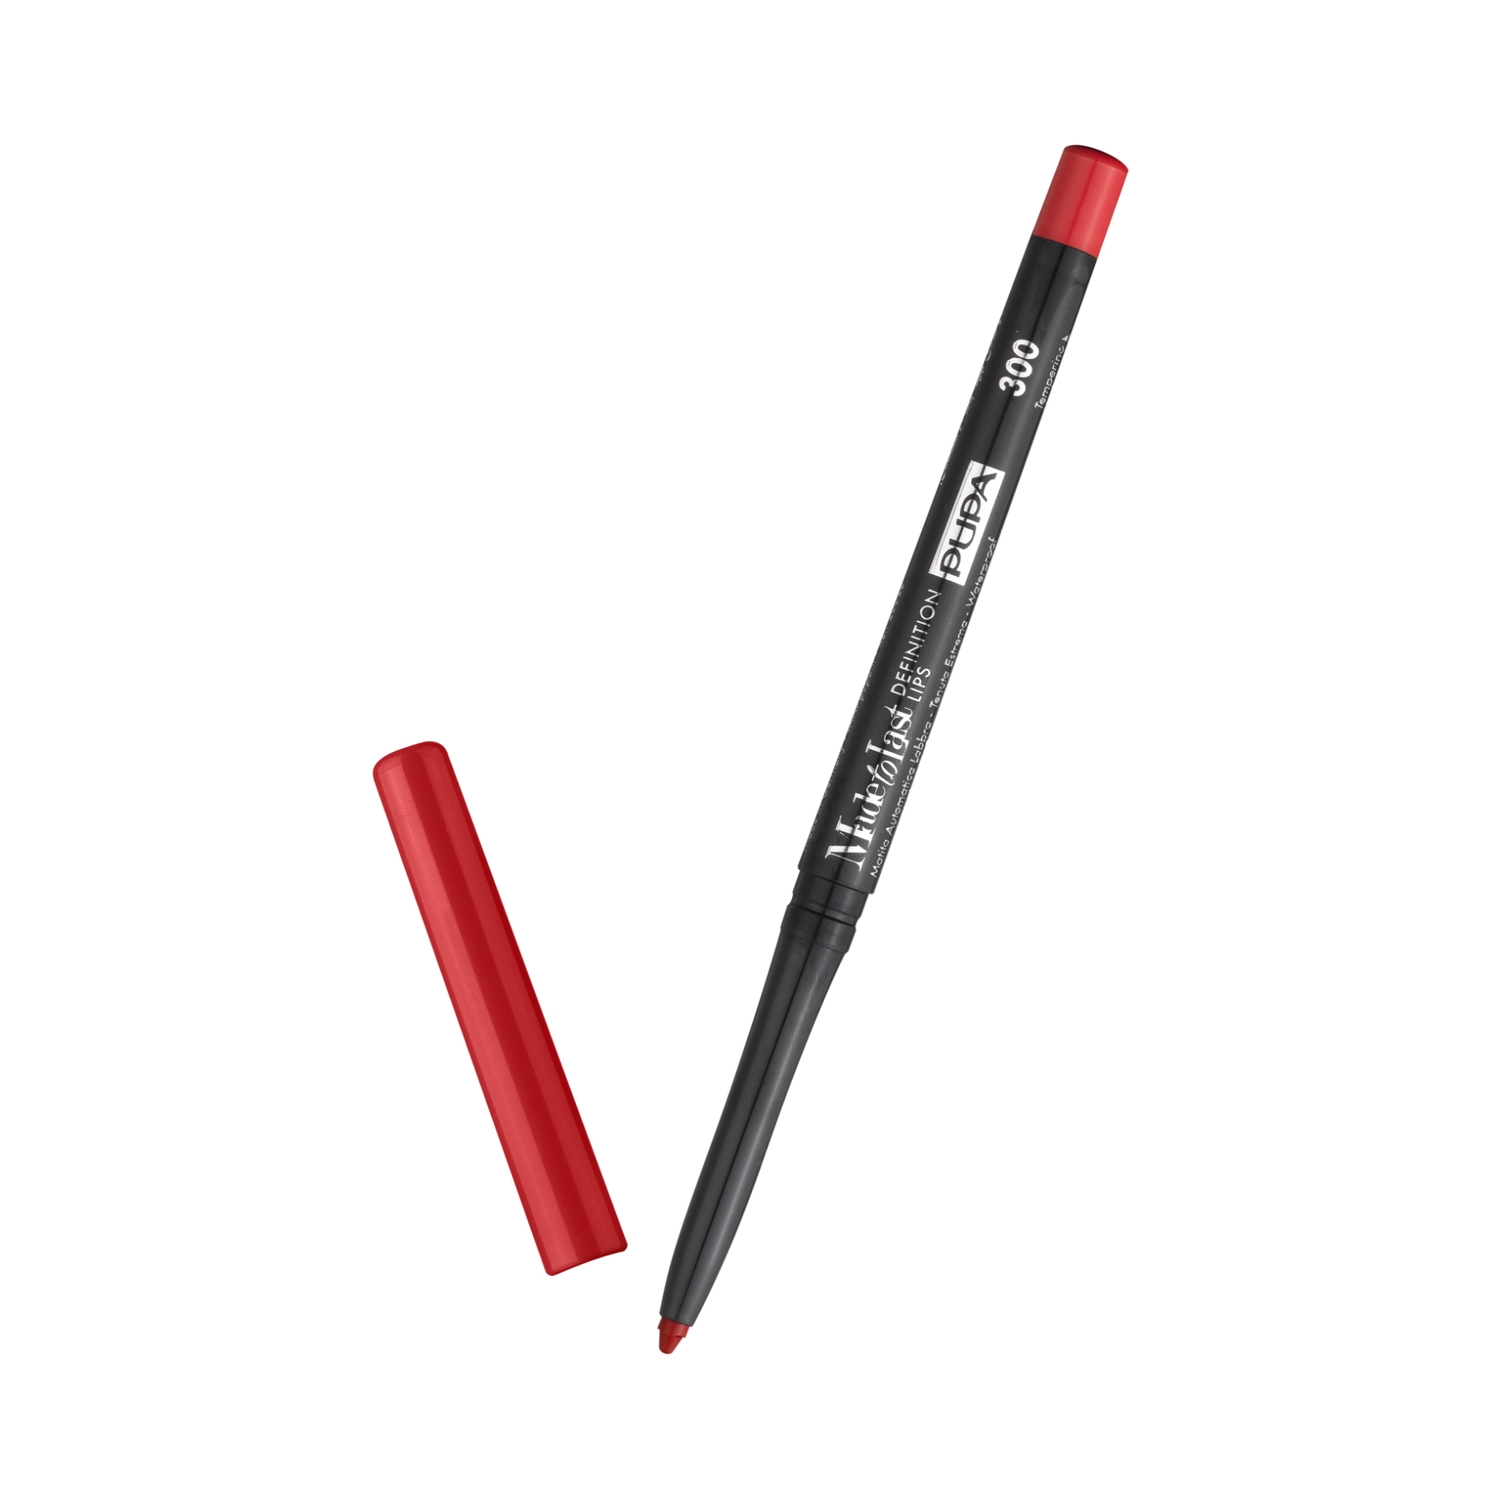 Pupa Milano | Pupa Milano Made To Last Definition Lip Pencil - 300 Red Passion (0.35g)